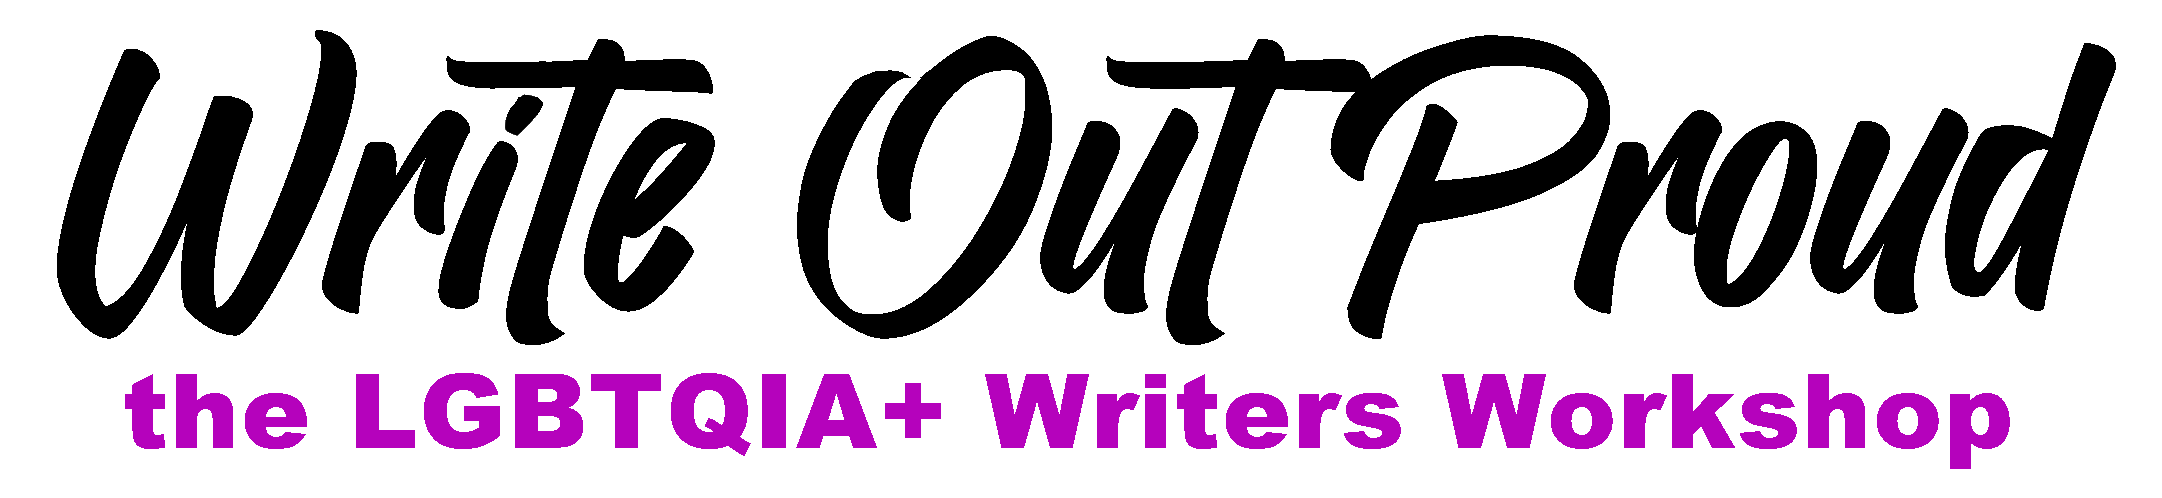 Write Out Proud